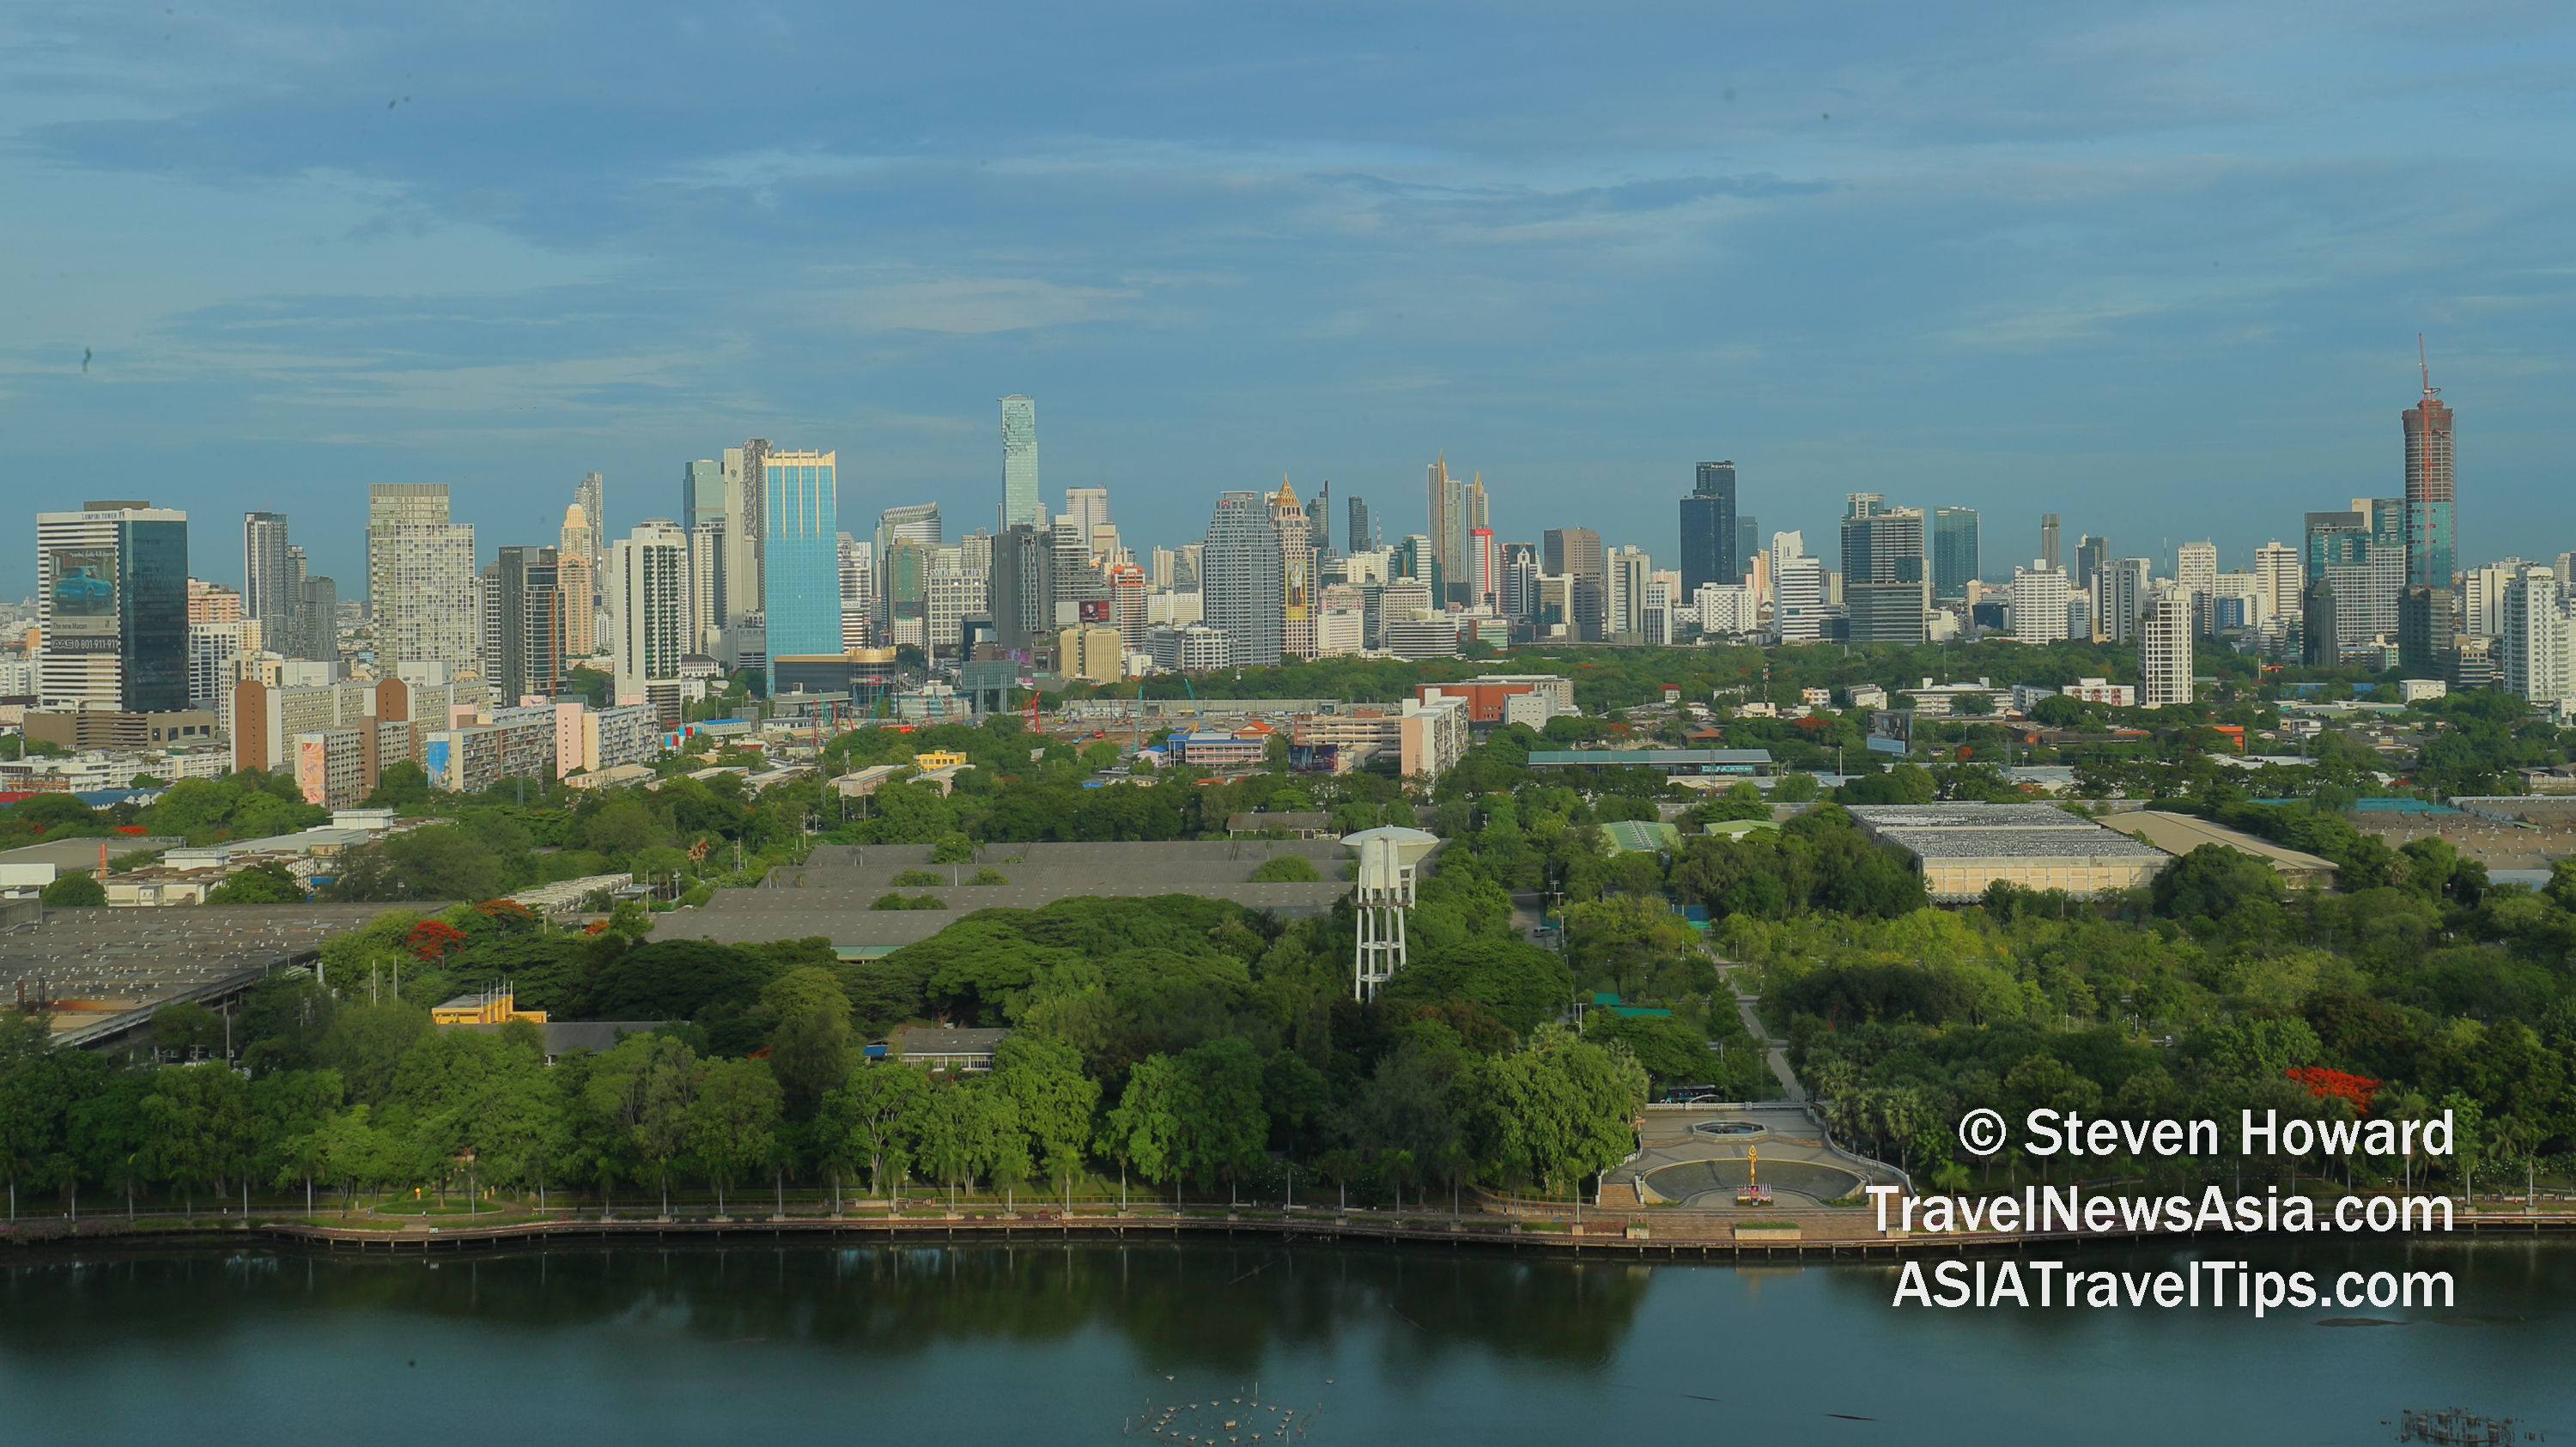 Just part of the absolutely amazing view from a Lakeview room at the Shama Lakeview Asoke in Bangkok, Thailand. Picture by Steven Howard of TravelNewsAsia.com Click to enlarge.